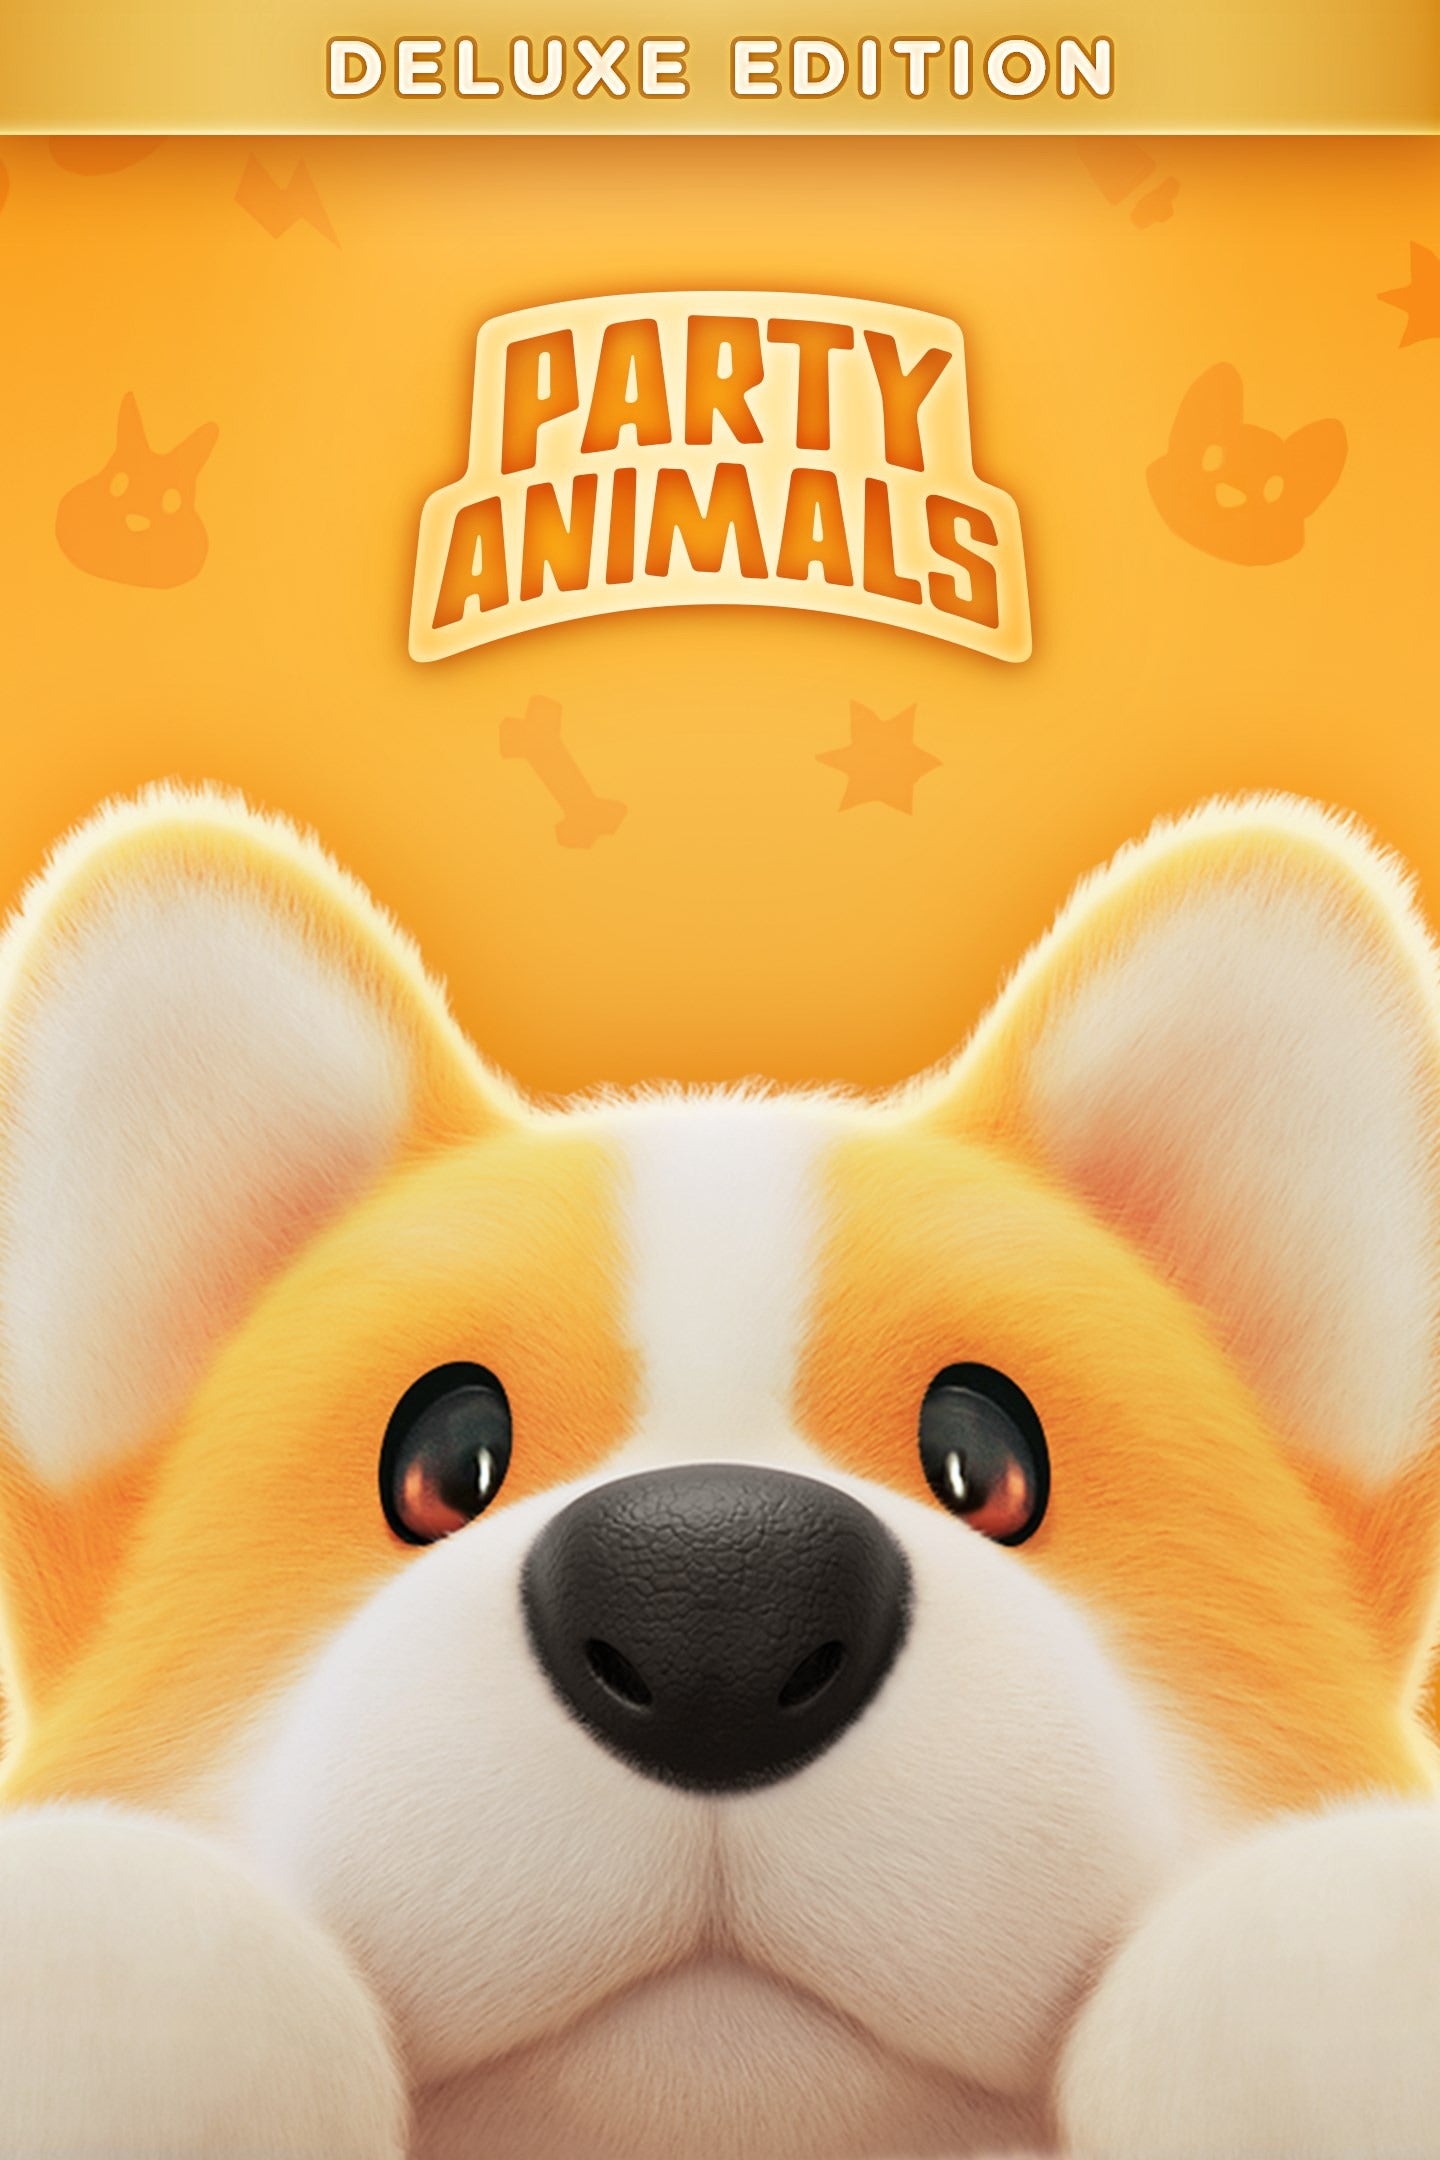 Party Animals (Deluxe Edition) - Xbox